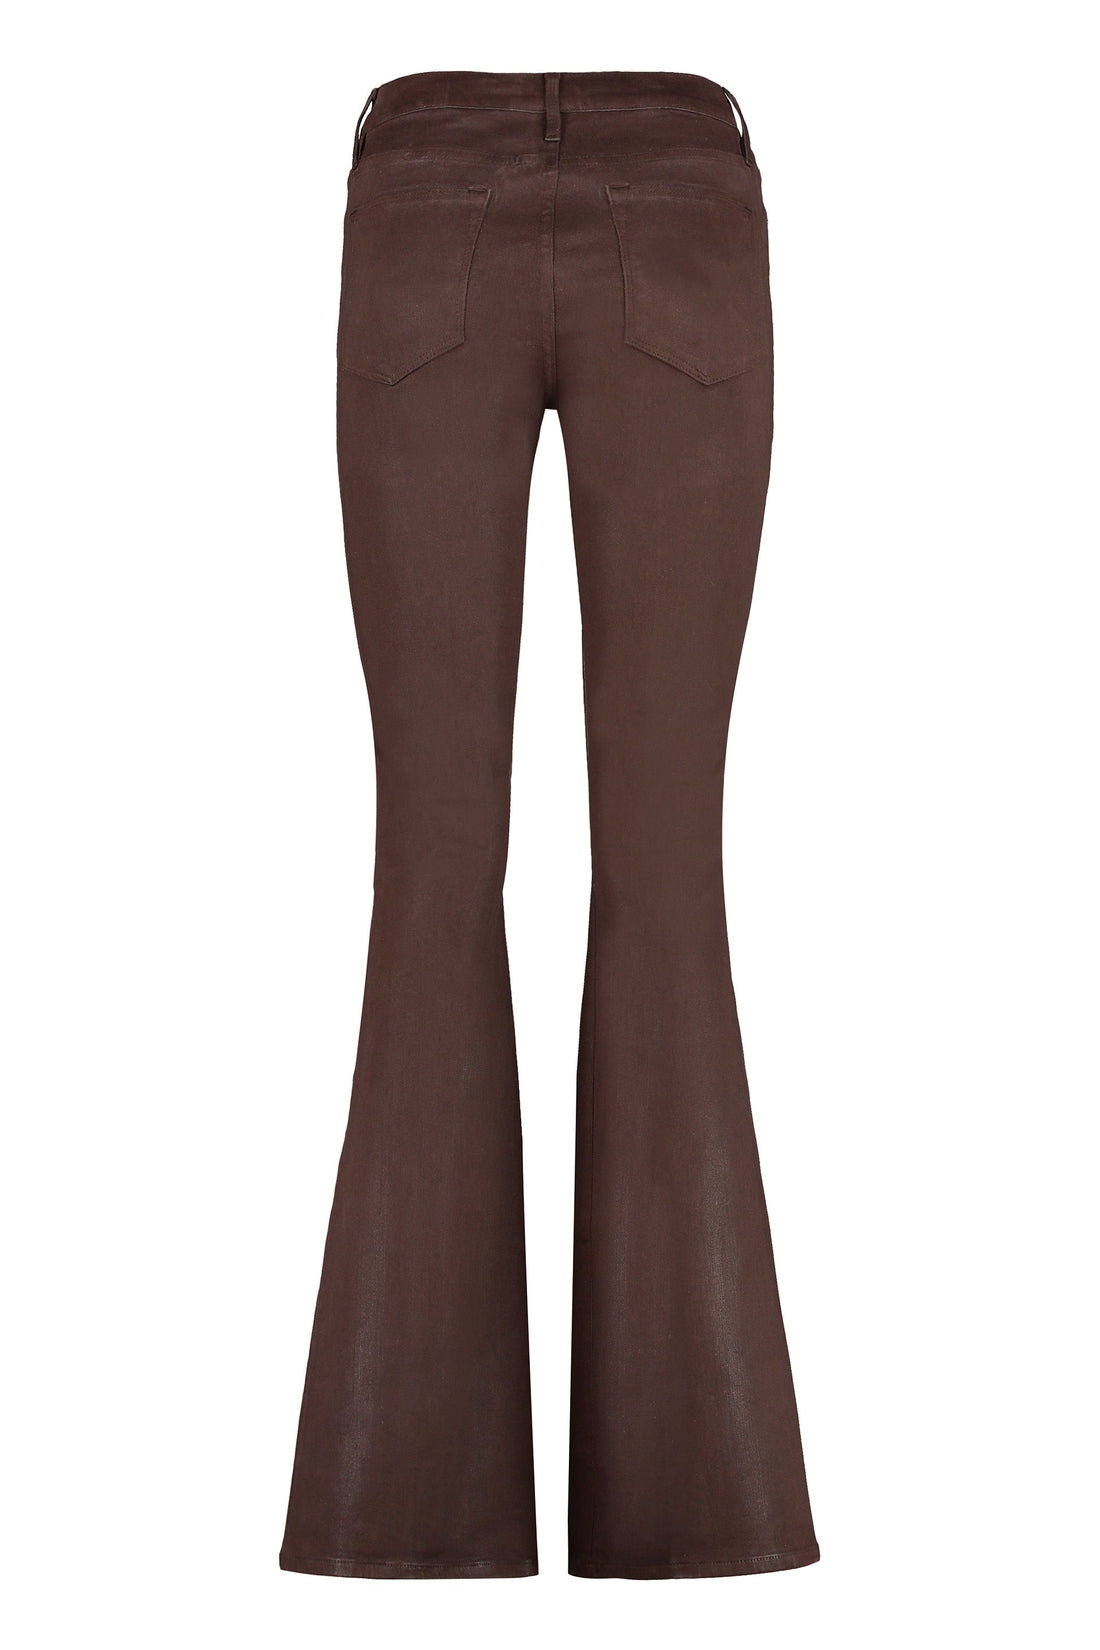 Frame-OUTLET-SALE-Le Hight Flare flared trousers-ARCHIVIST